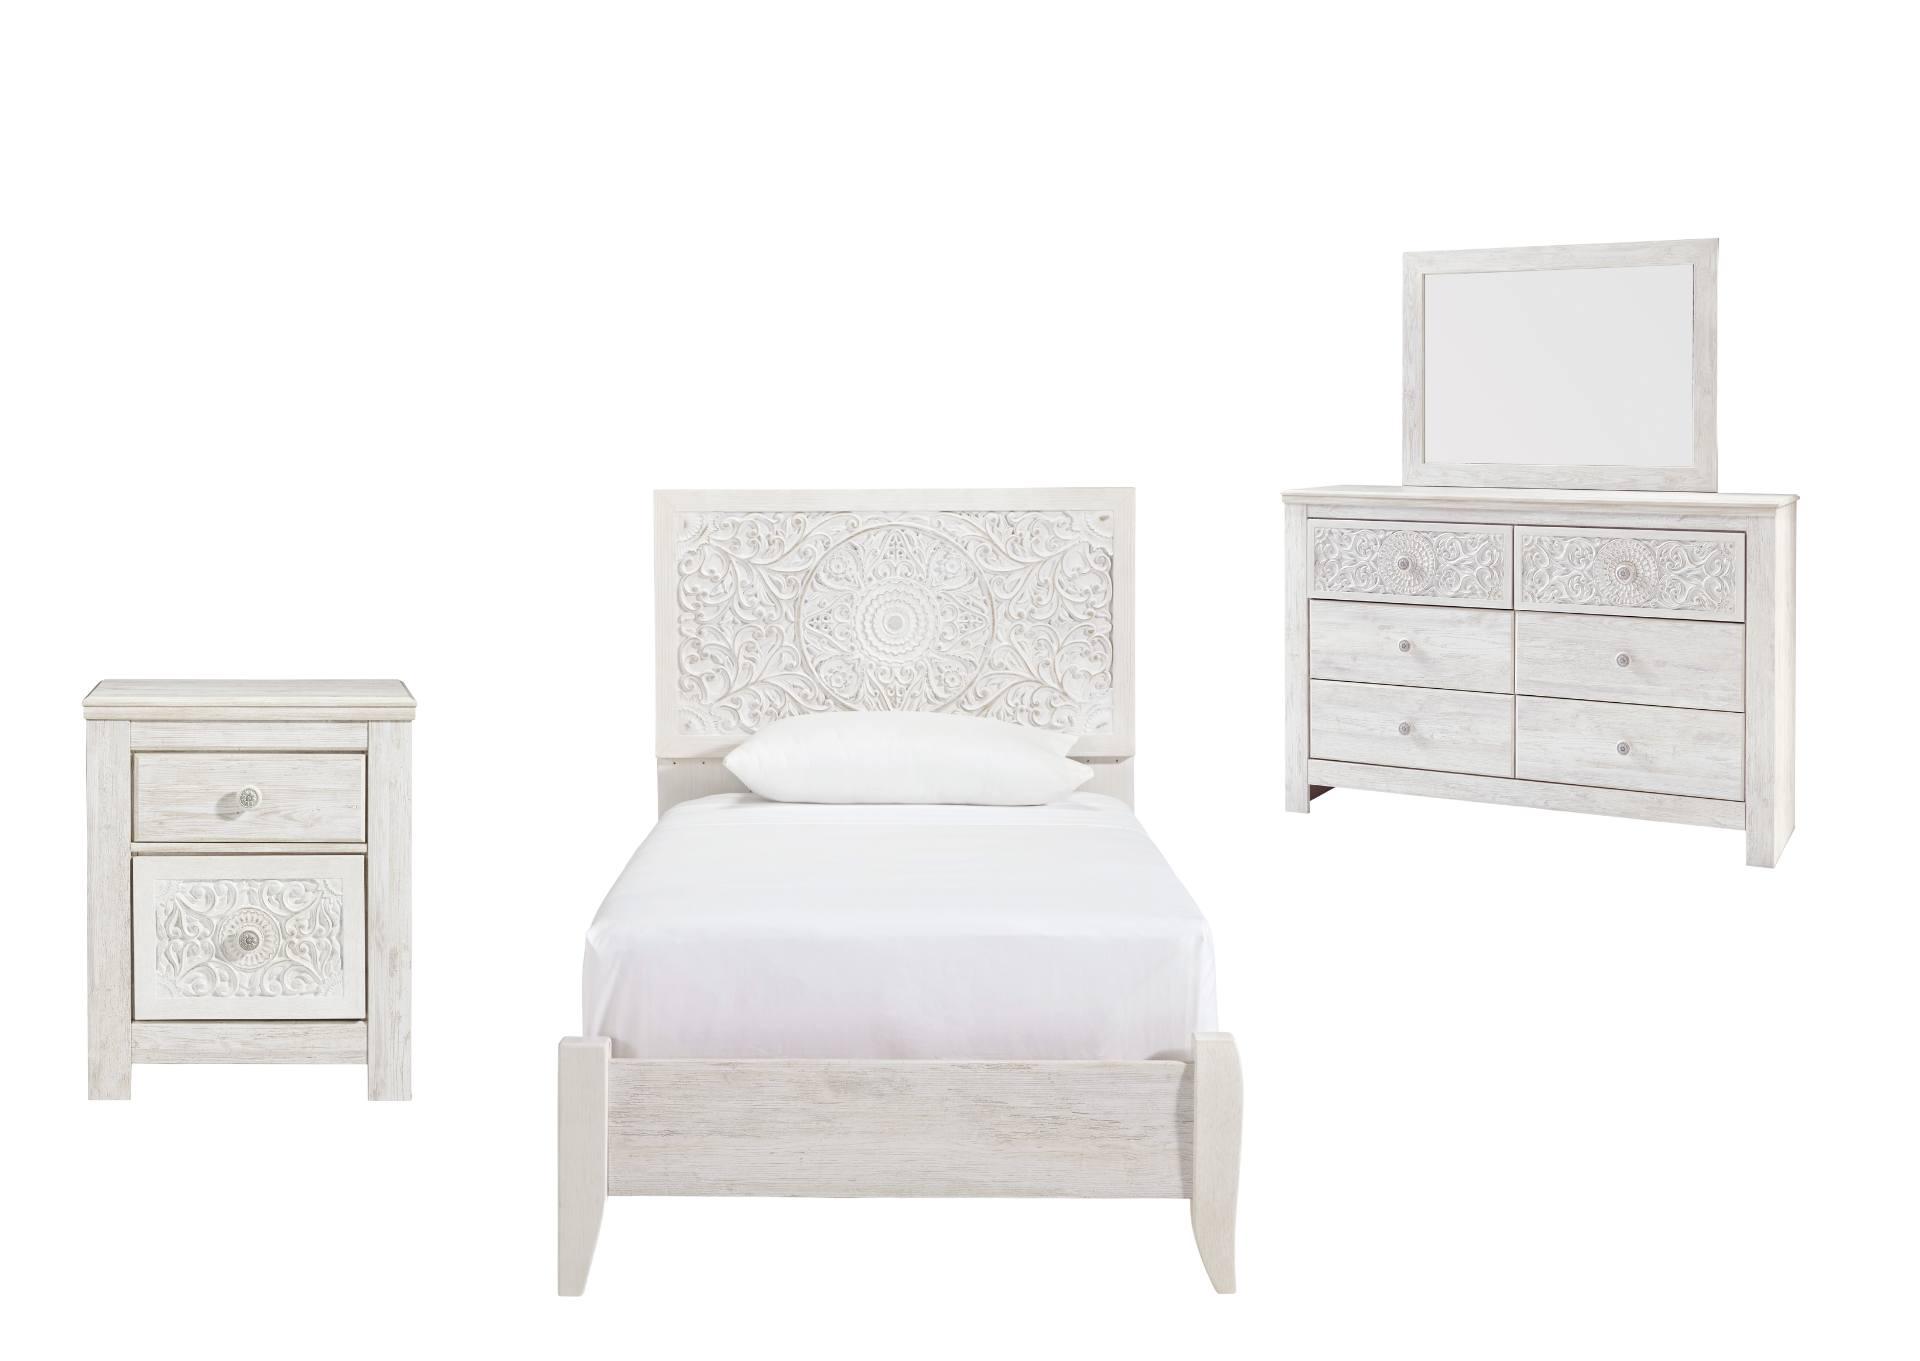 PAXBERRY TWIN BEDROOM SET,ASHLEY FURNITURE INC.